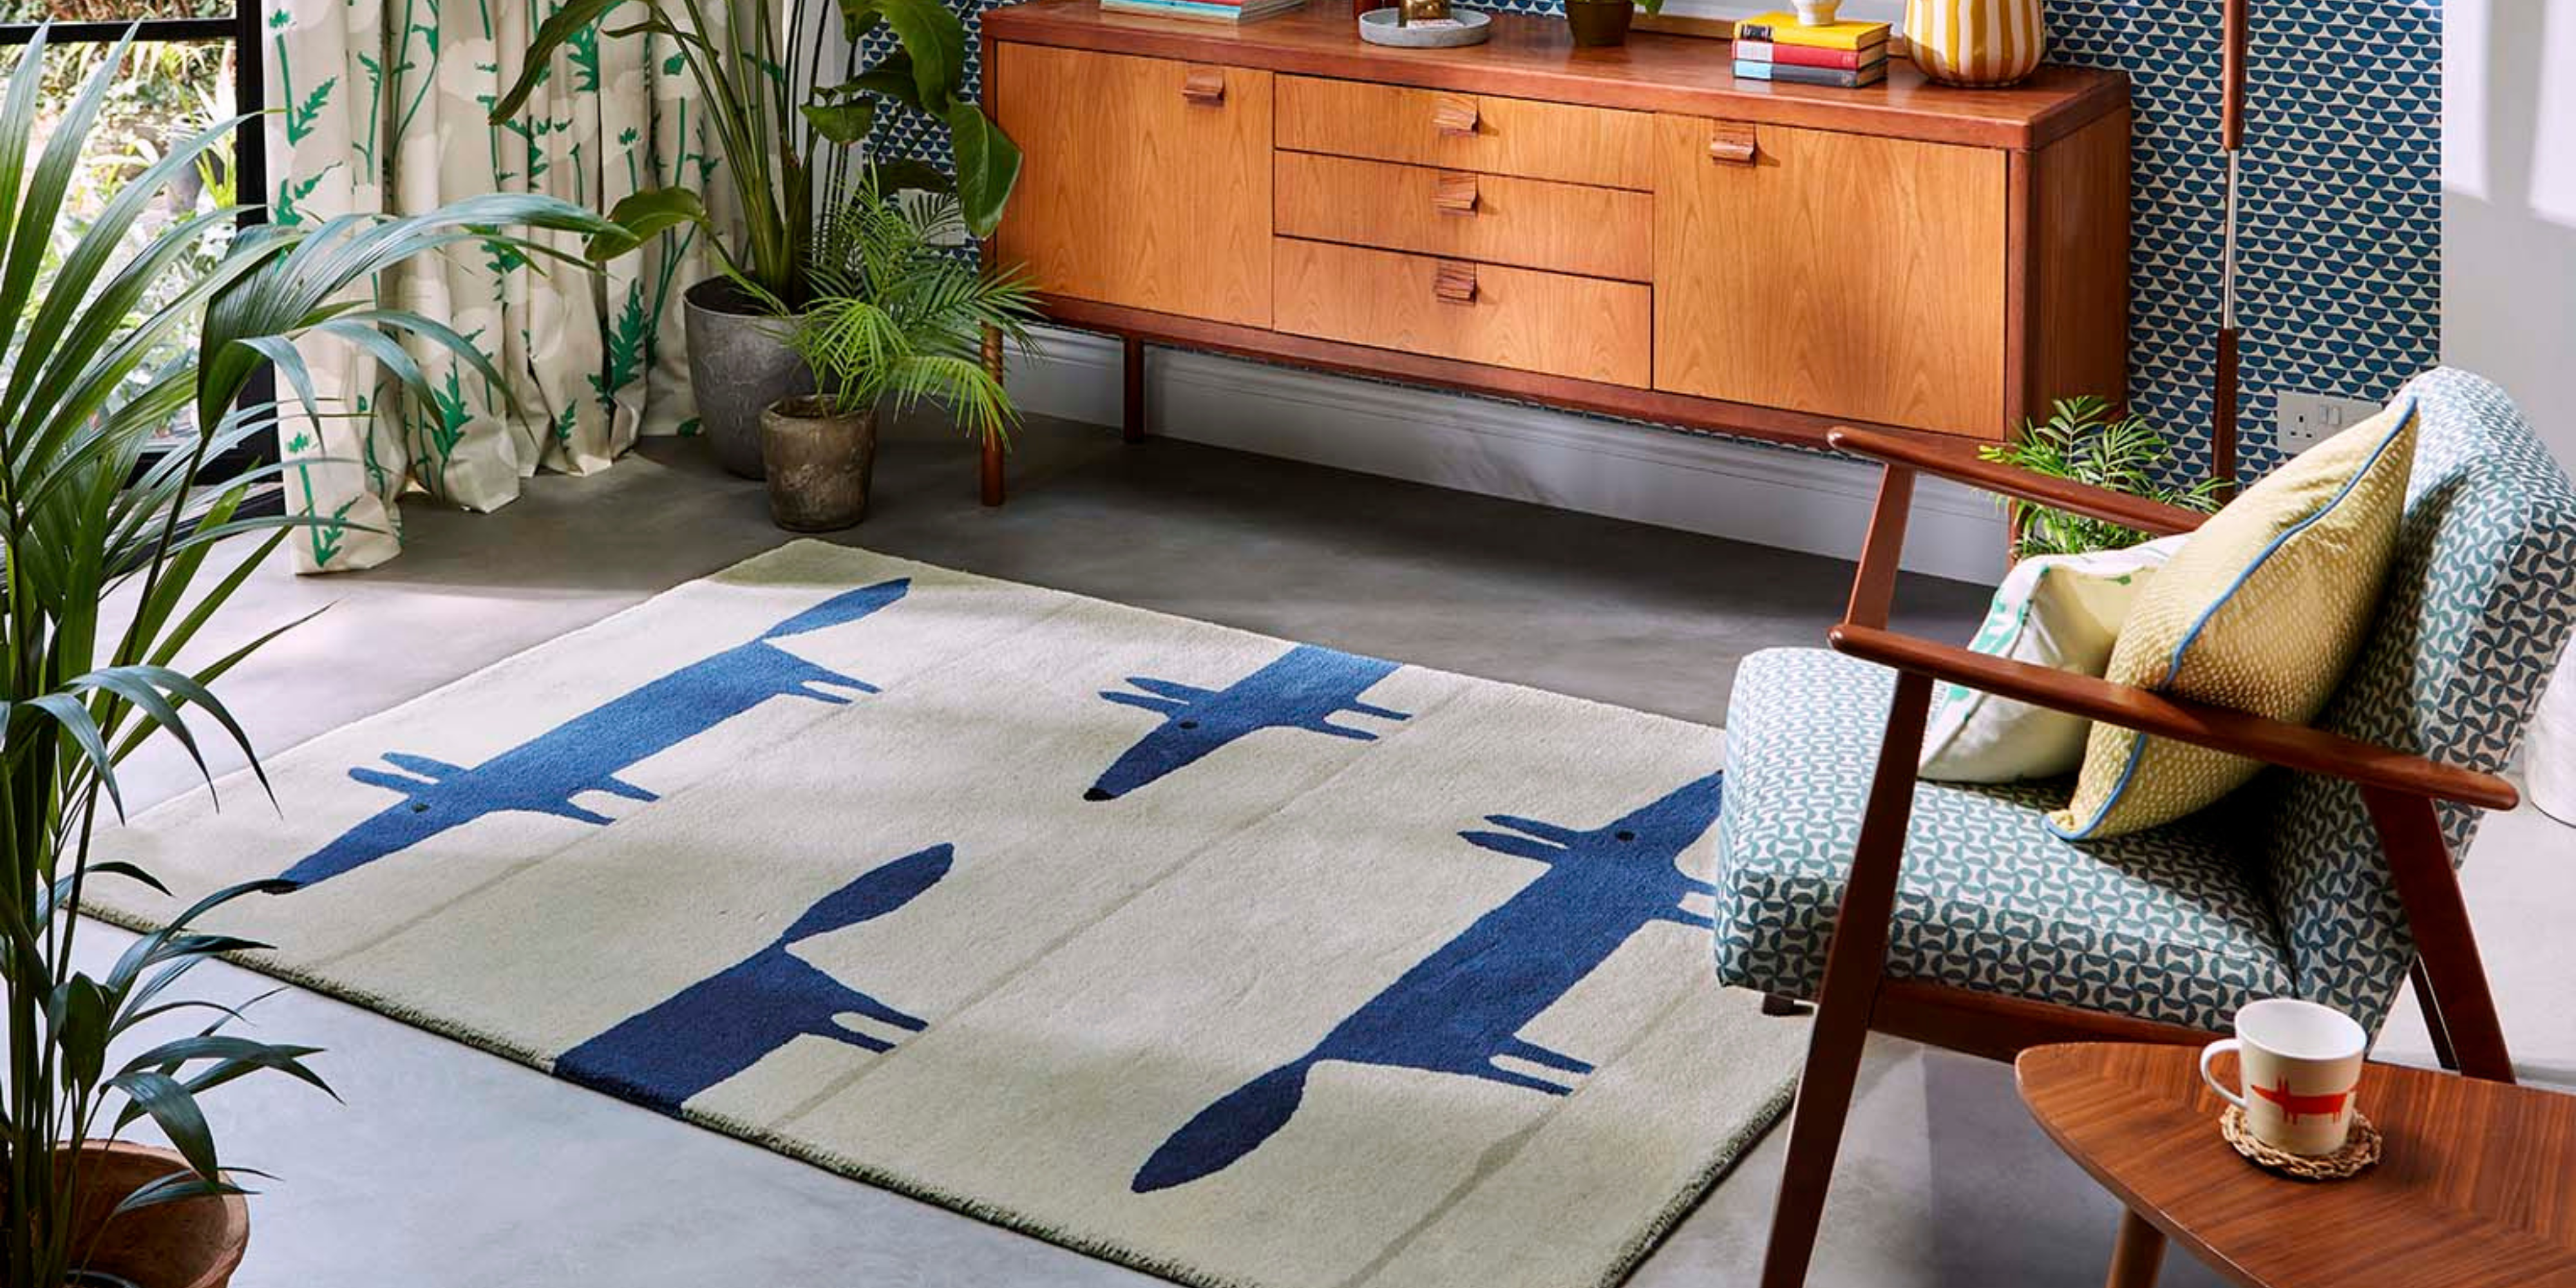 3 Reasons Why Scion Rugs are Perfect for Children’s Bedrooms